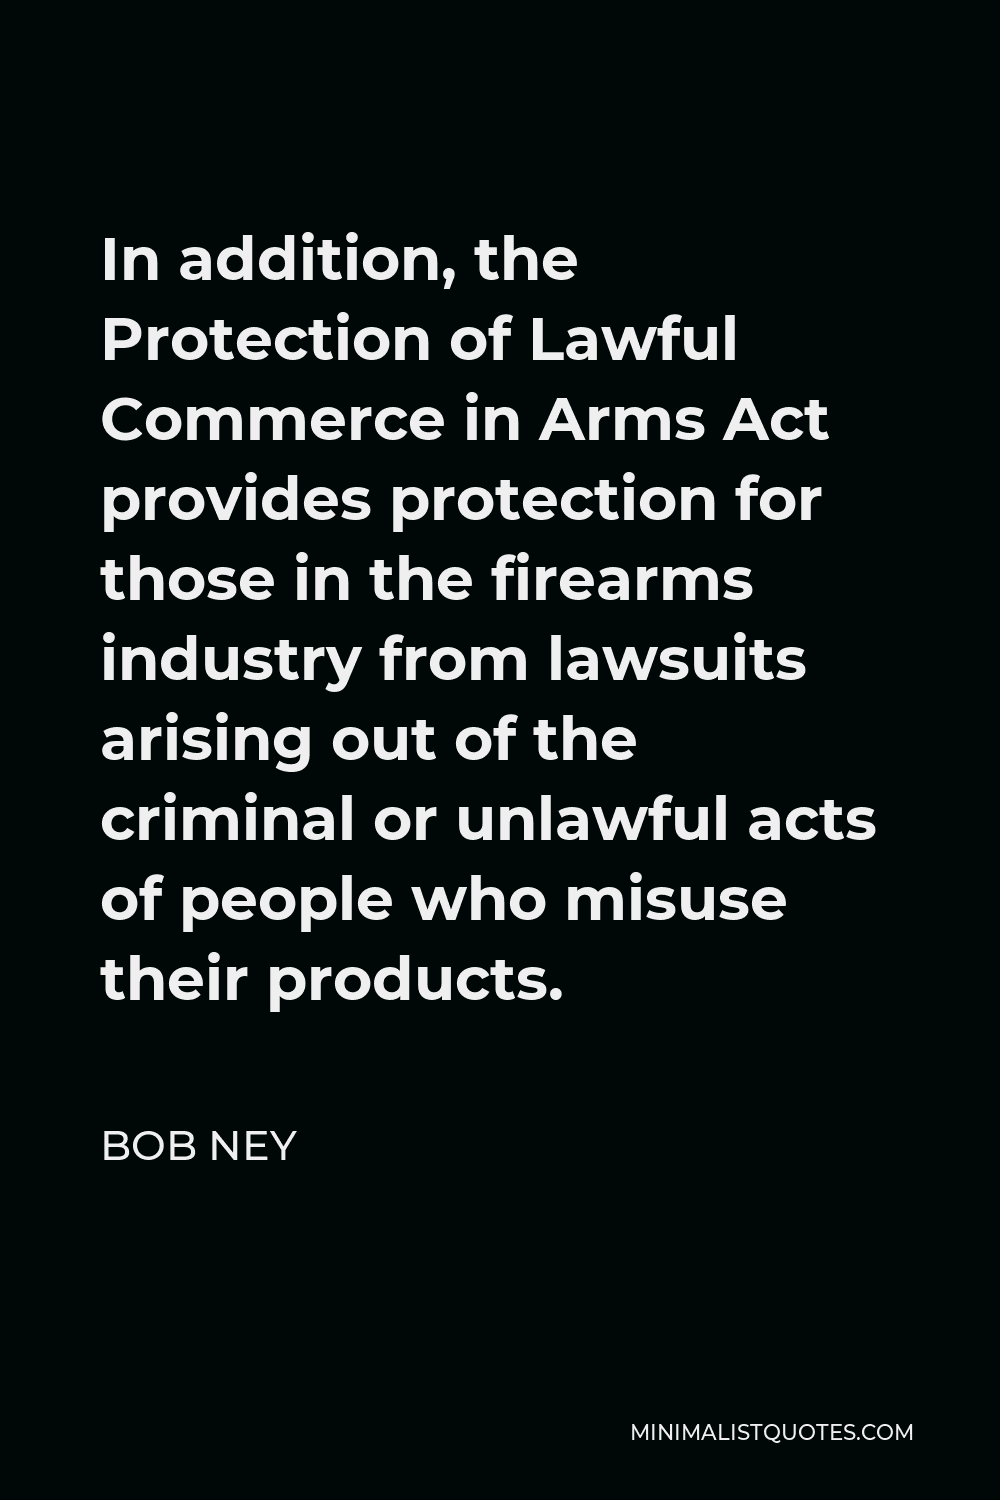 Bob Ney Quote - In addition, the Protection of Lawful Commerce in Arms Act provides protection for those in the firearms industry from lawsuits arising out of the criminal or unlawful acts of people who misuse their products.